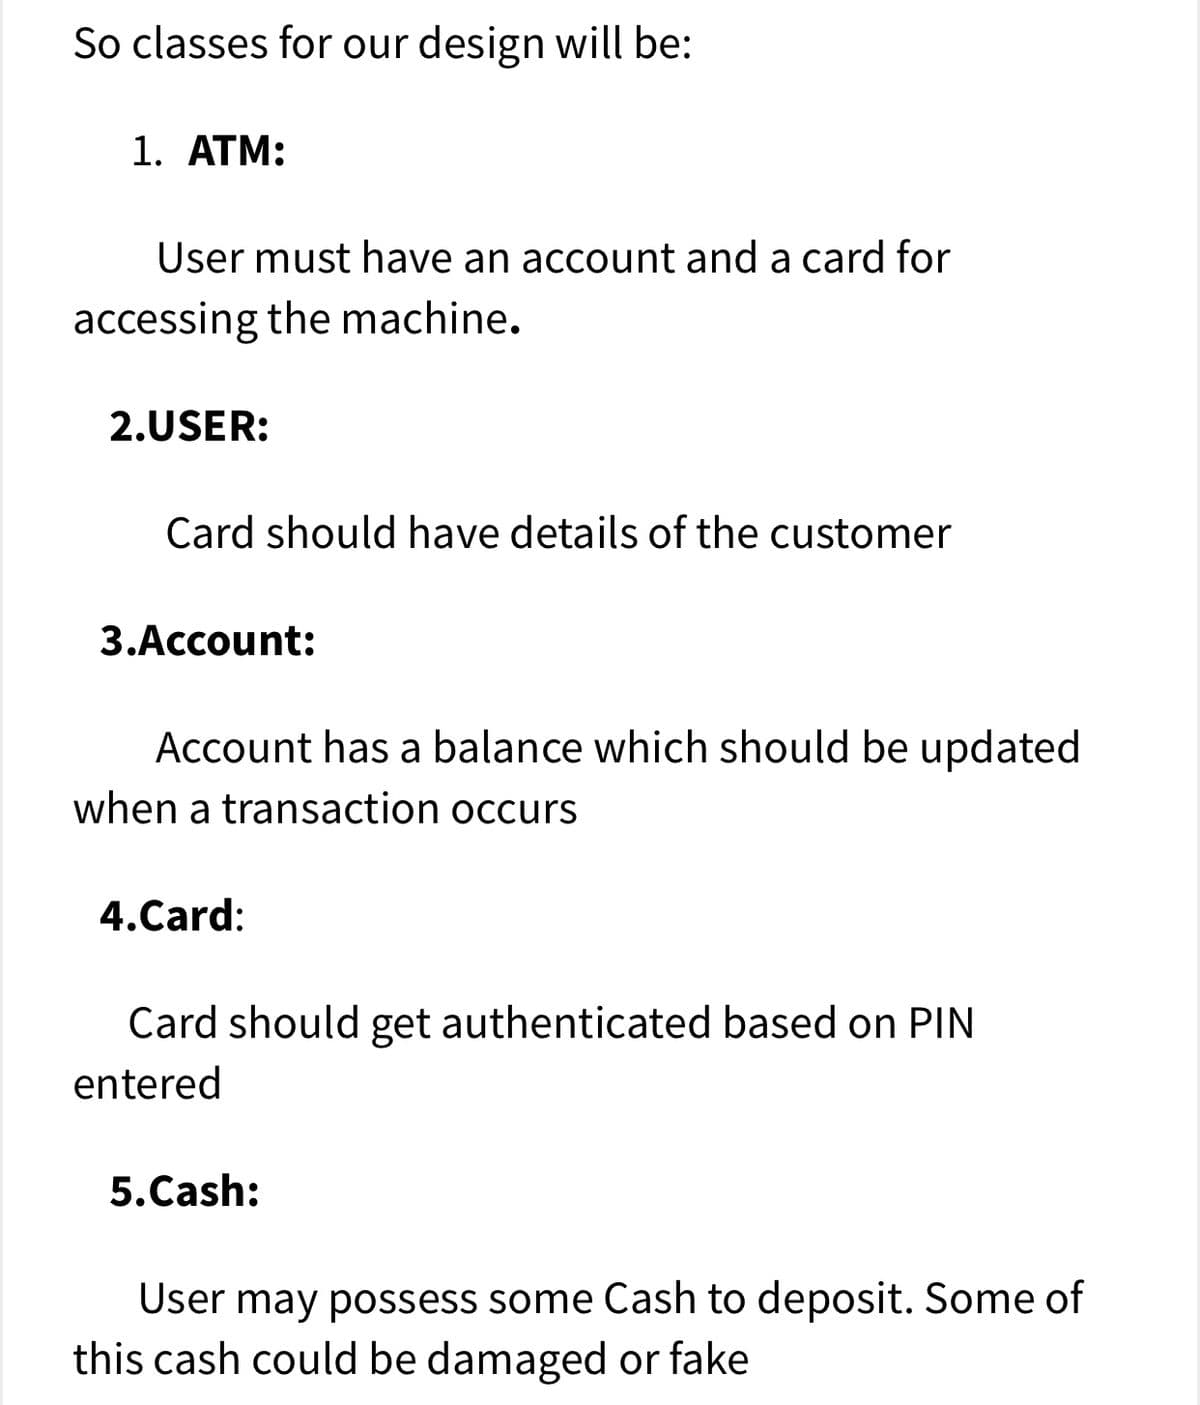 So classes for our design will be:
1. AТM:
User must have an account and a card for
accessing the machine.
2.USER:
Card should have details of the customer
3.Account:
Account has a balance which should be updated
when a transaction occurs
4.Card:
Card should get authenticated based on PIN
entered
5.Cash:
User may possess some Cash to deposit. Some of
this cash could be damaged or fake
